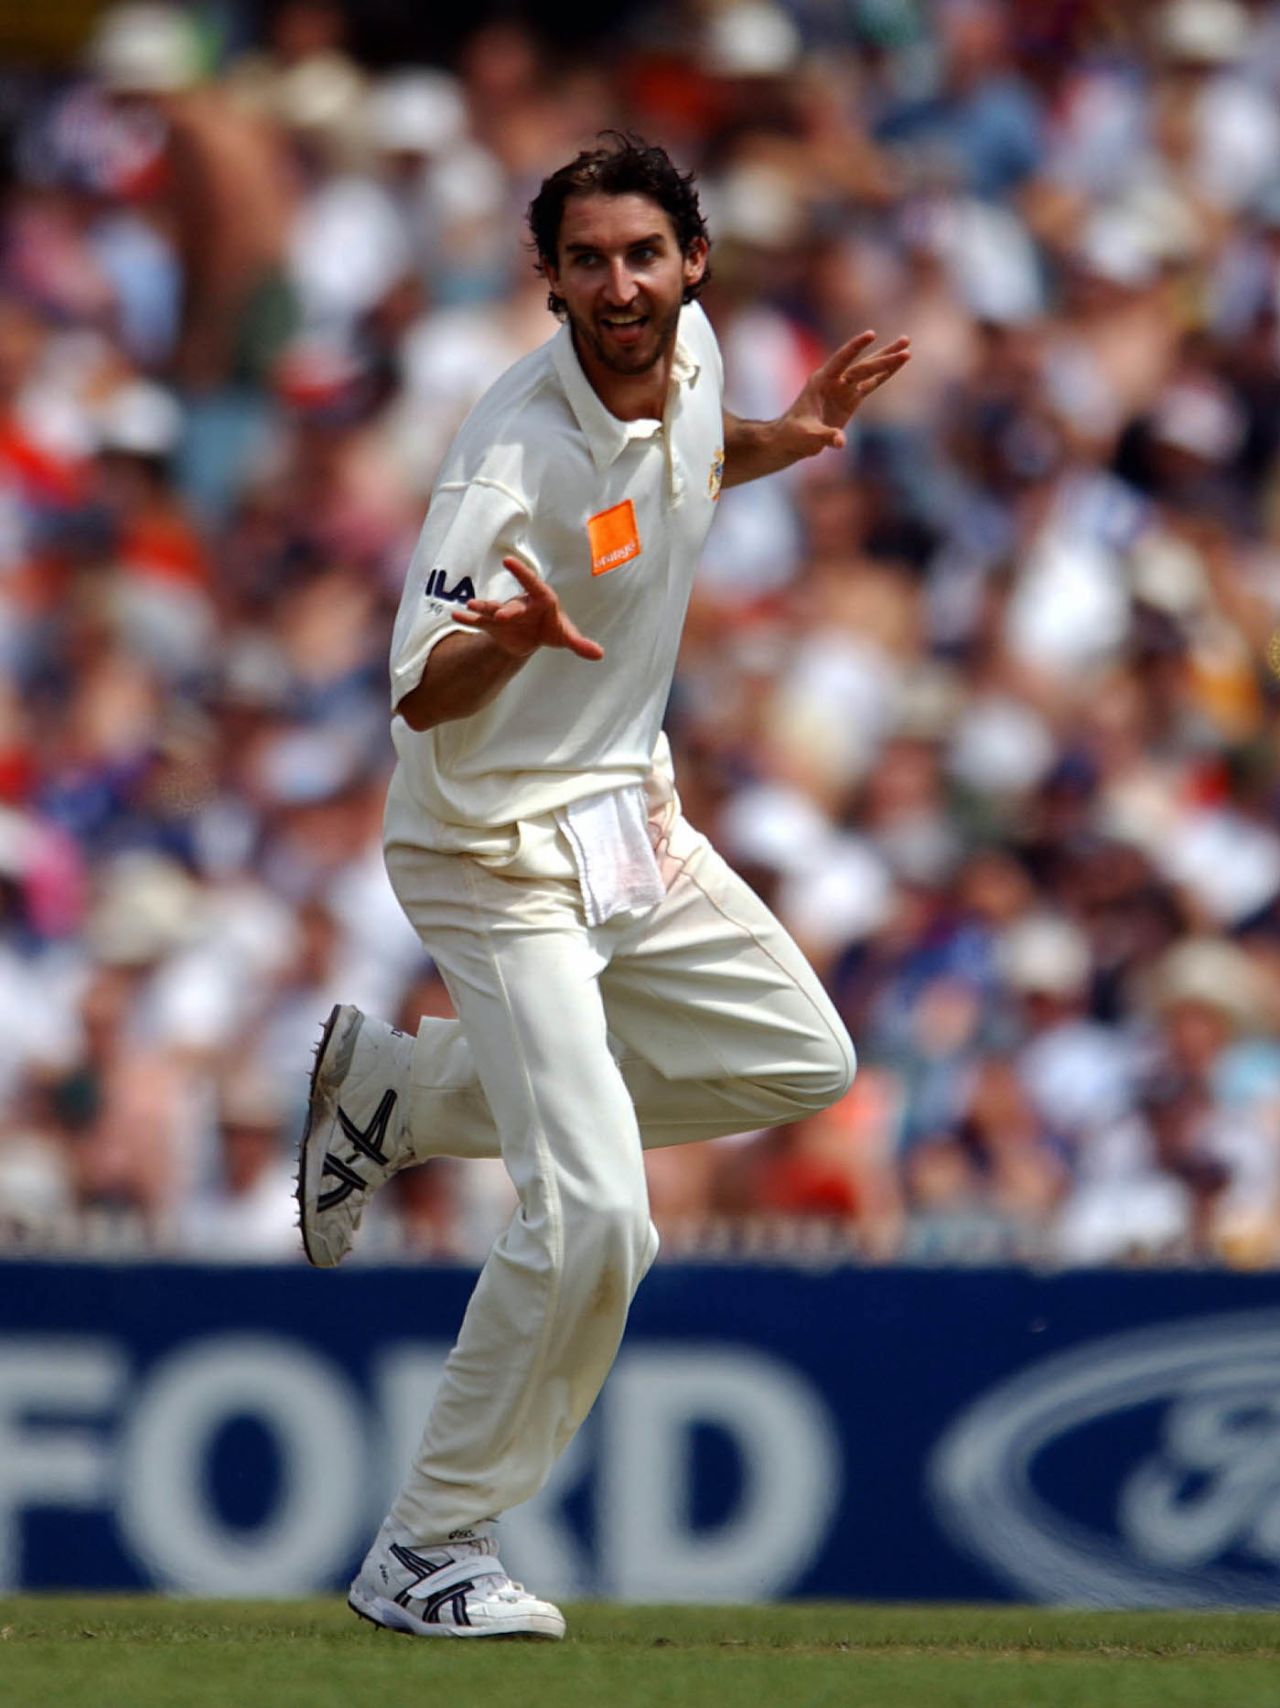 Jason Gillespie celebrates Andy Caddick wicket with a caper, third day, fourth Test, Australia vs England, the Ashes, December 28, 2002